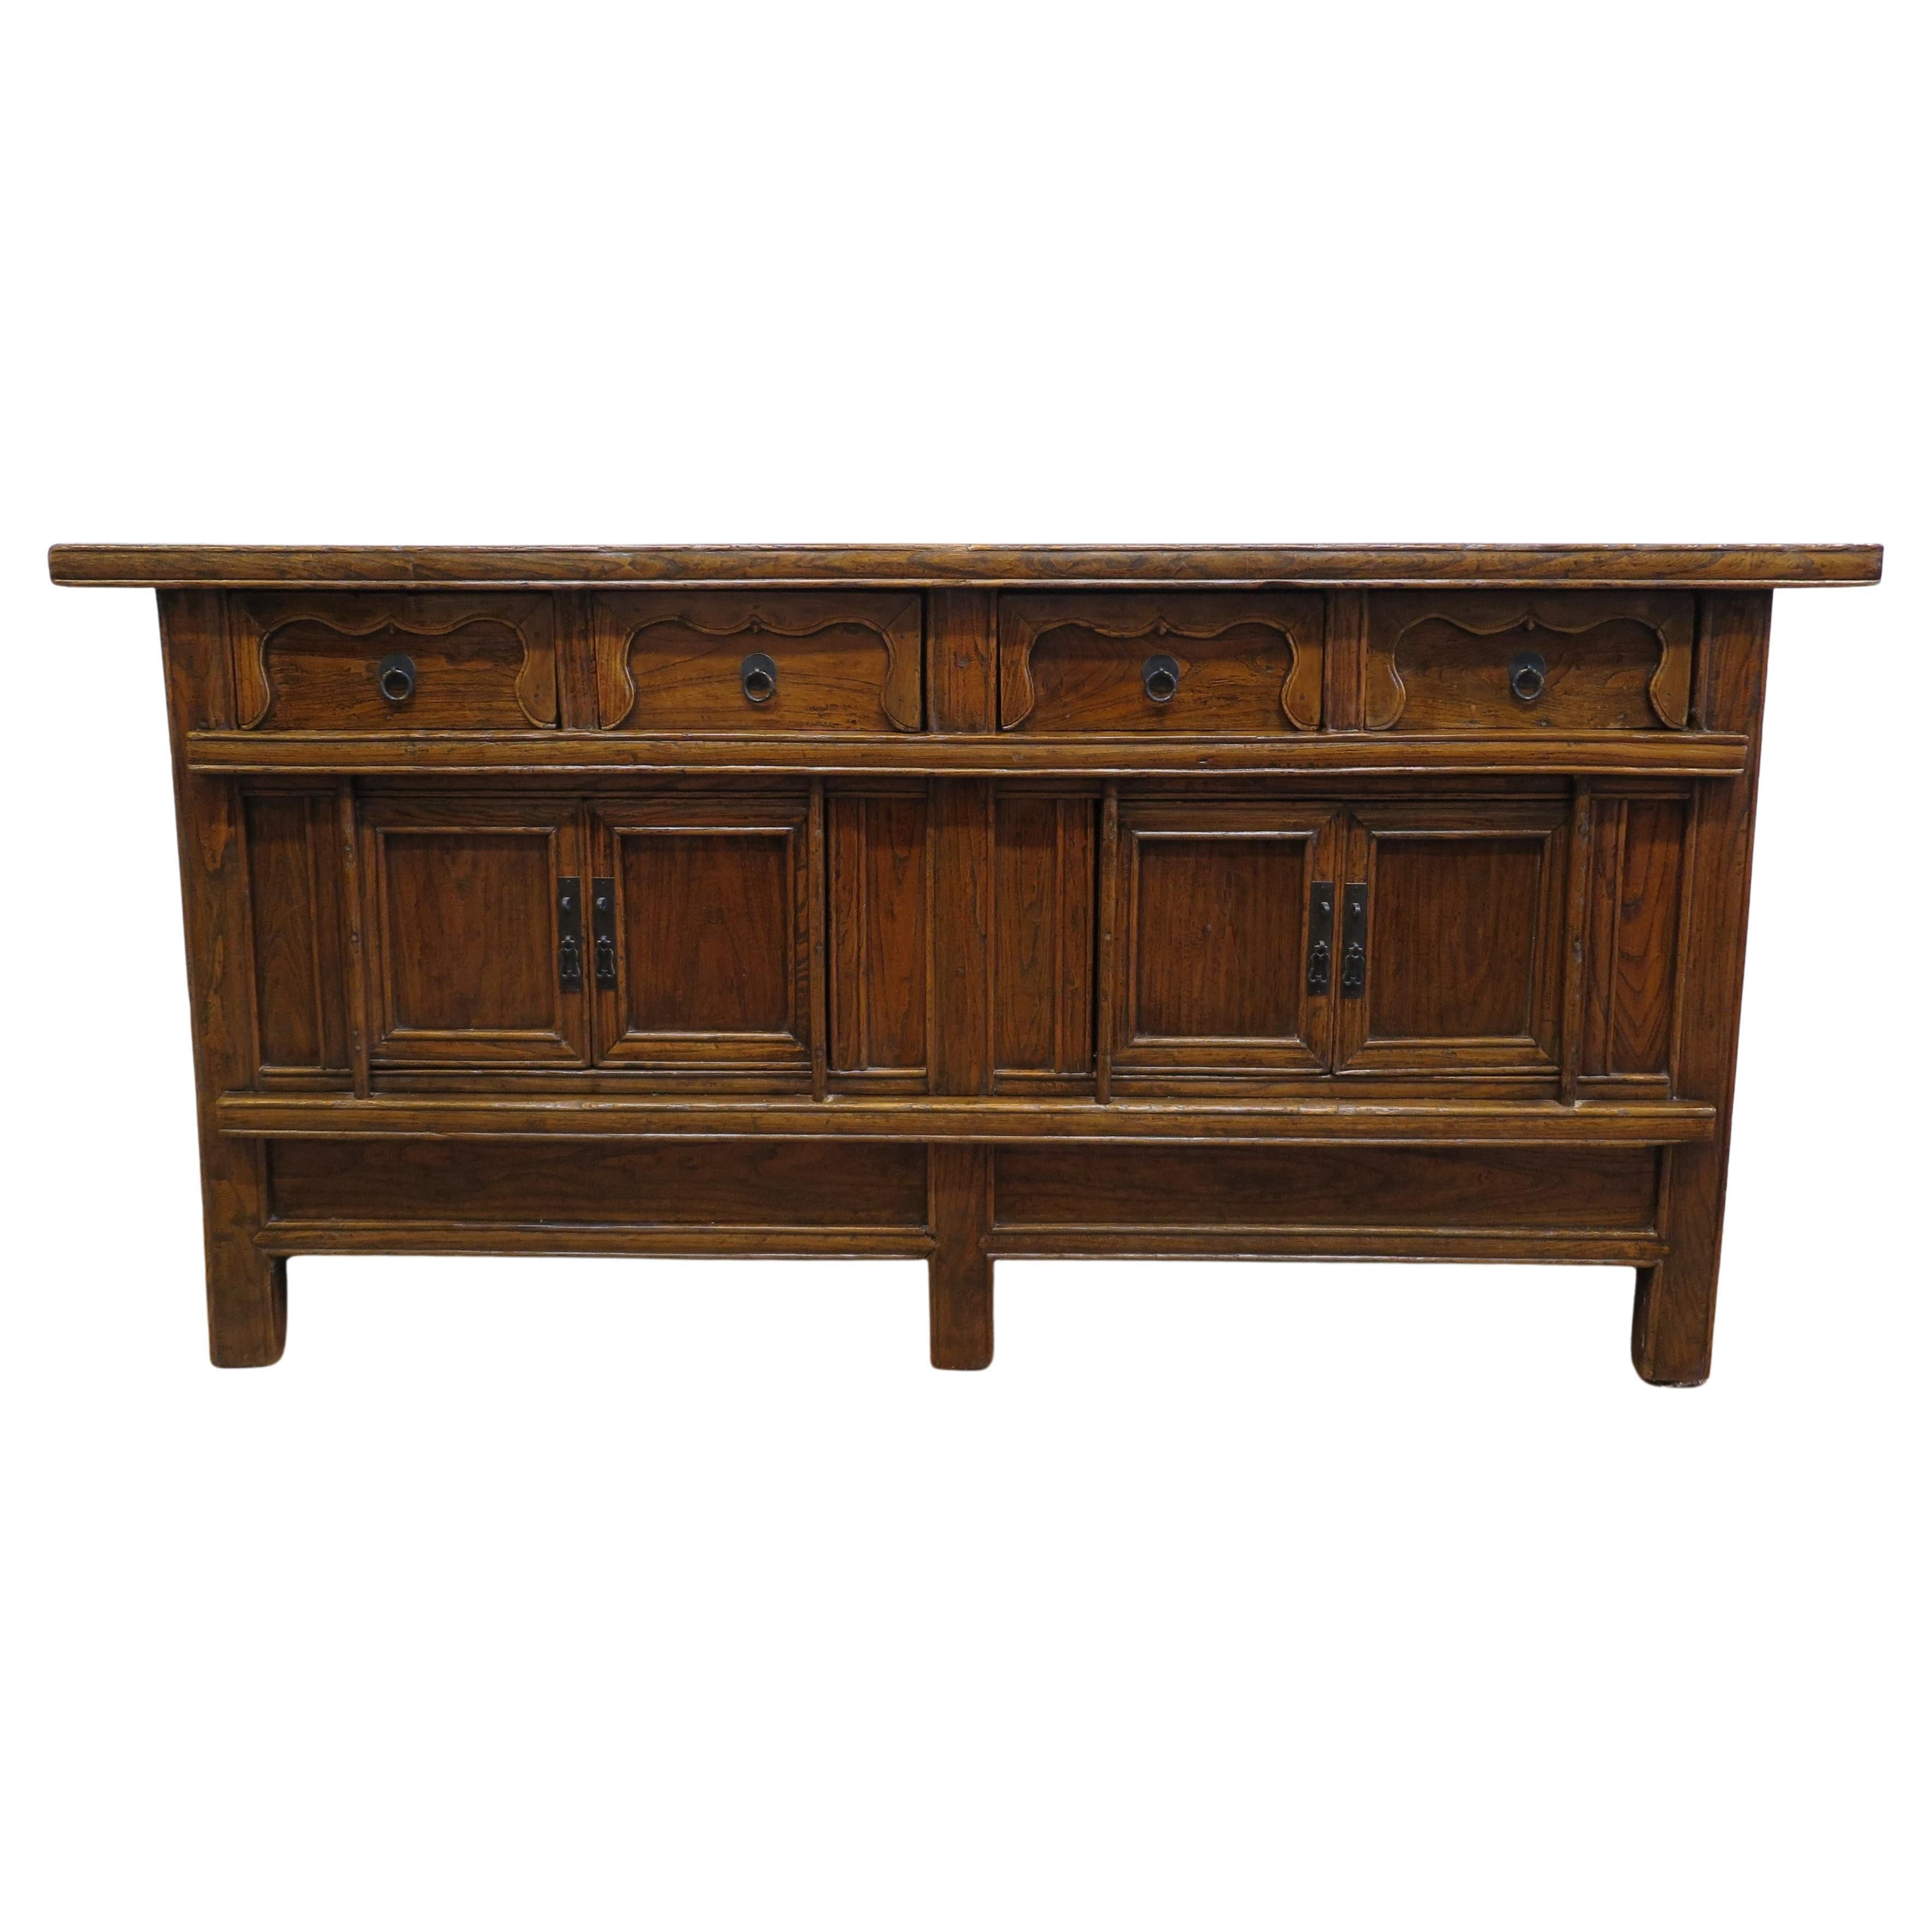 Country 19th Century Provincial Sideboard 